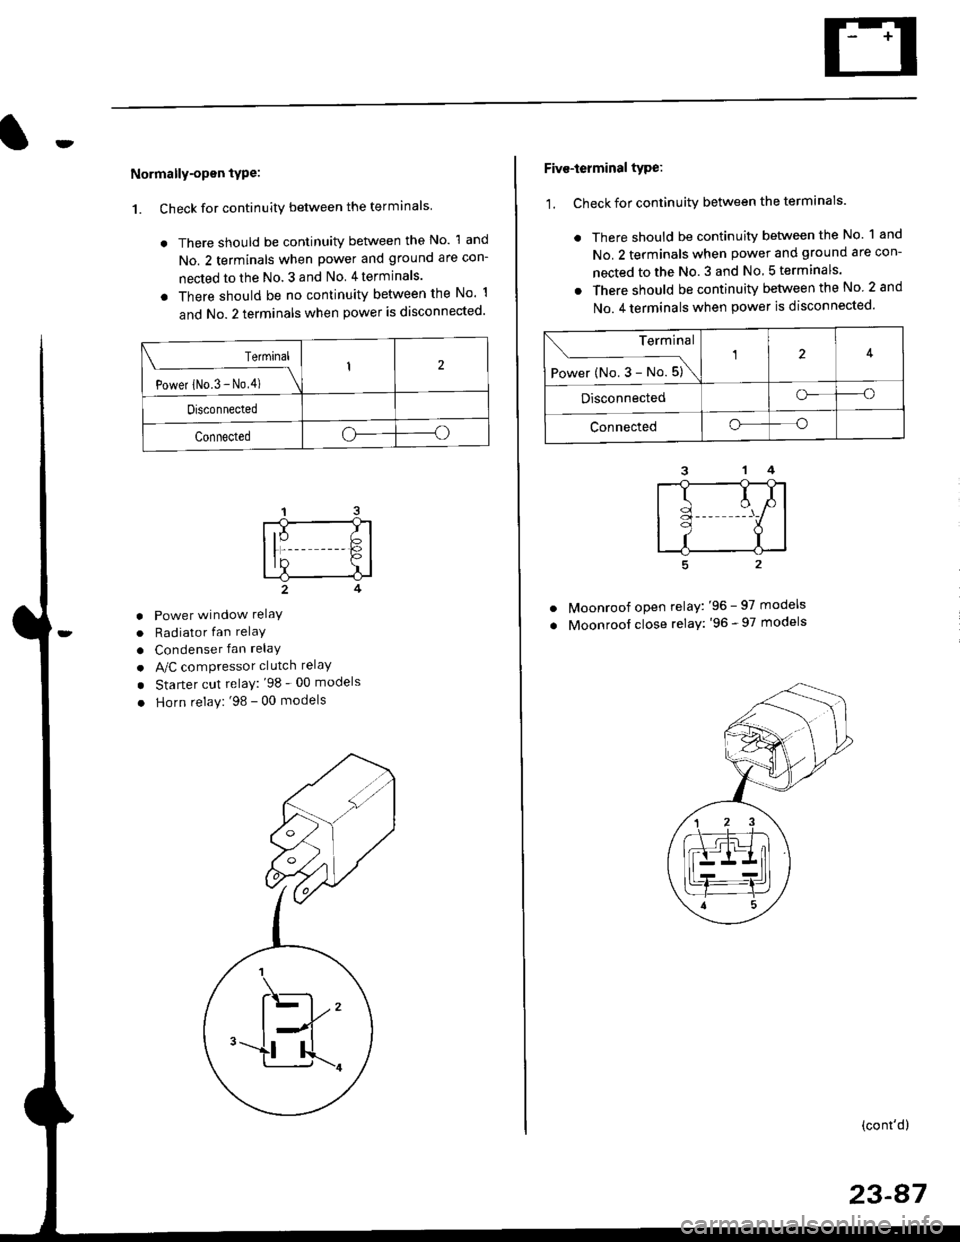 HONDA CIVIC 1998 6.G Manual PDF Normally-opsn tYPe:
1. Check for continuity between the terminals
. There should be continuity between the No. 1 and
No. 2 terminals when power and ground are con-
nected to the No. 3 and No 4terminal